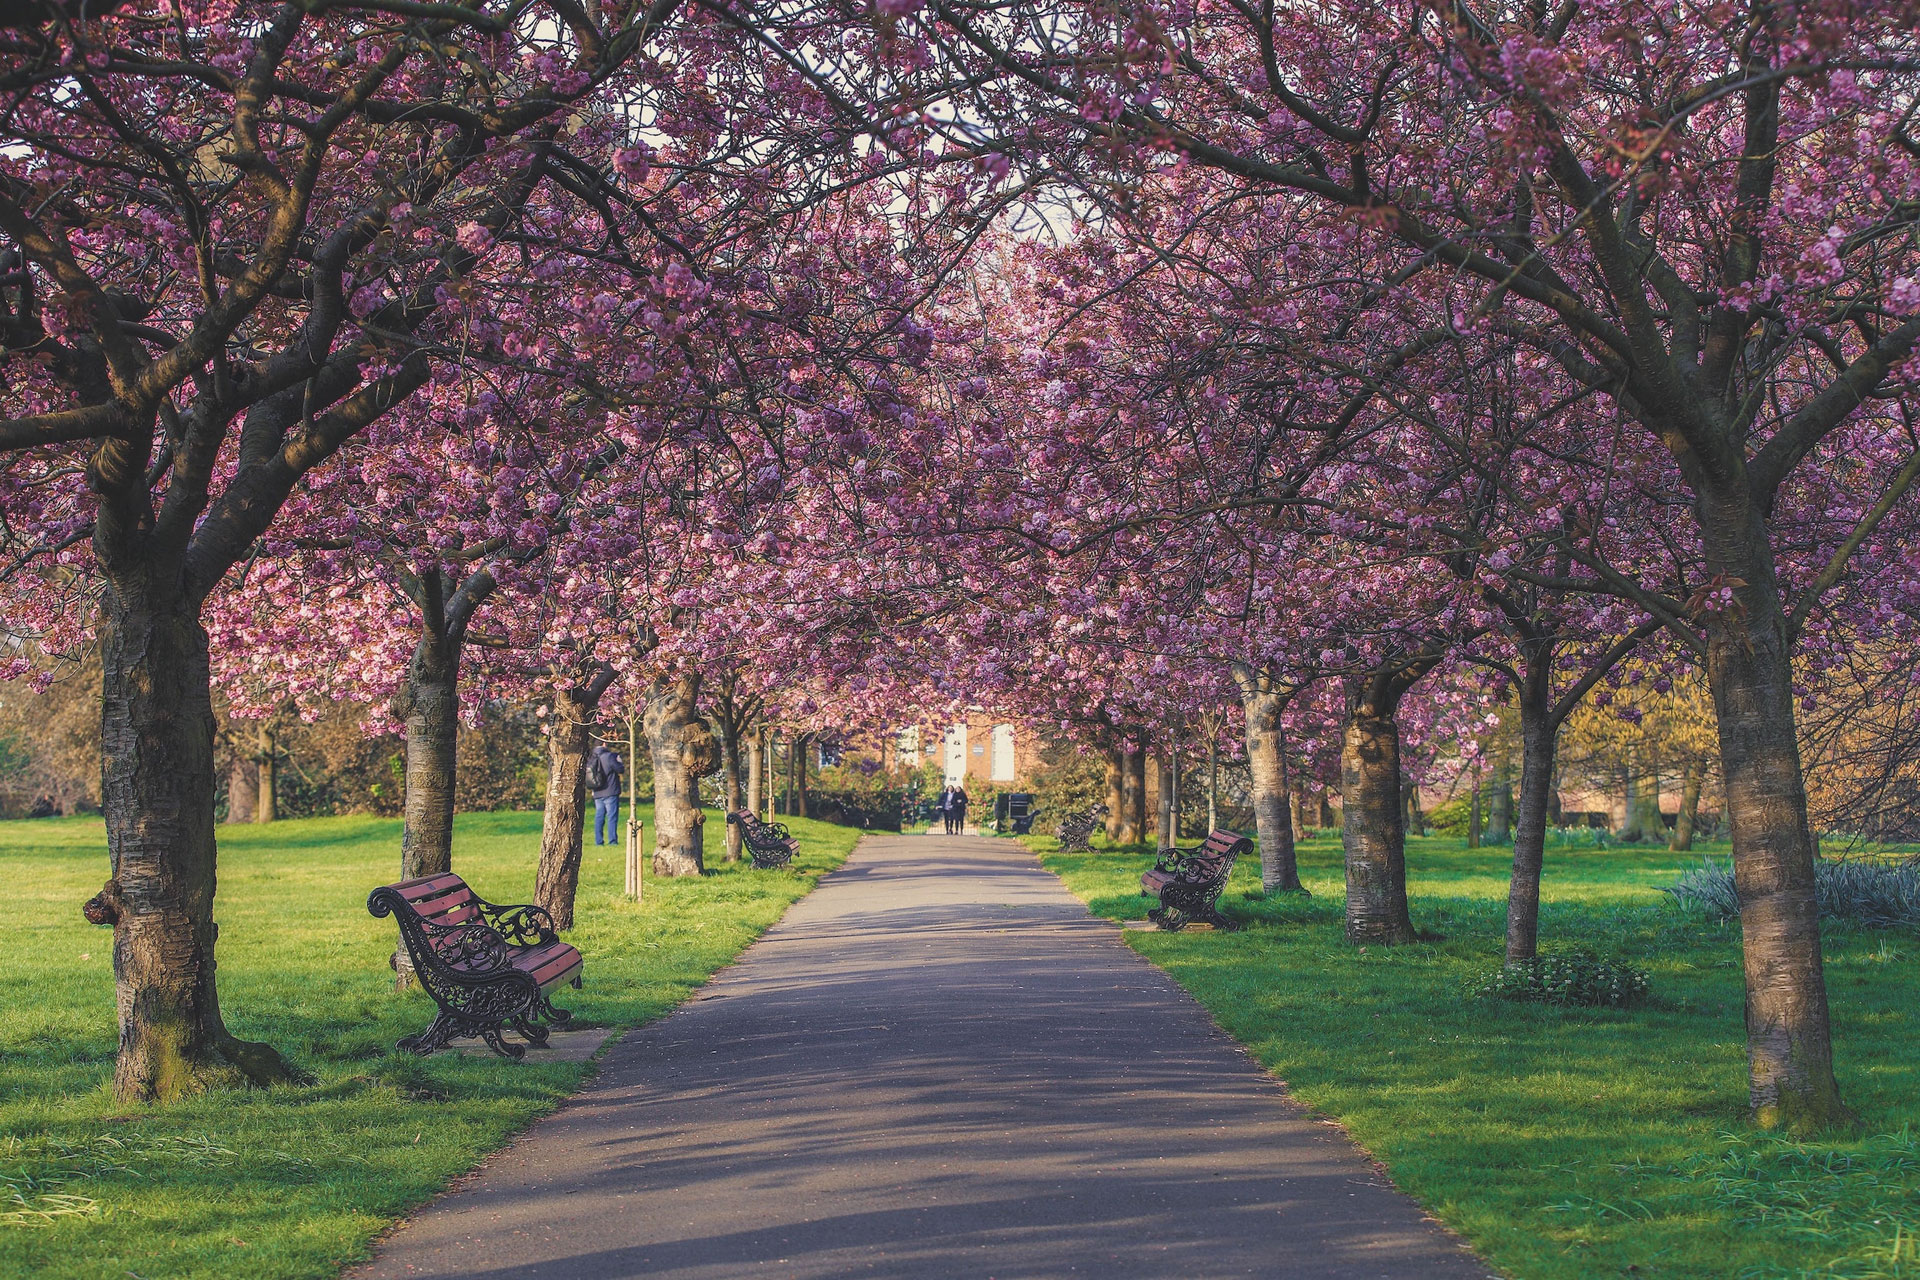 Pathway between pink blossom trees